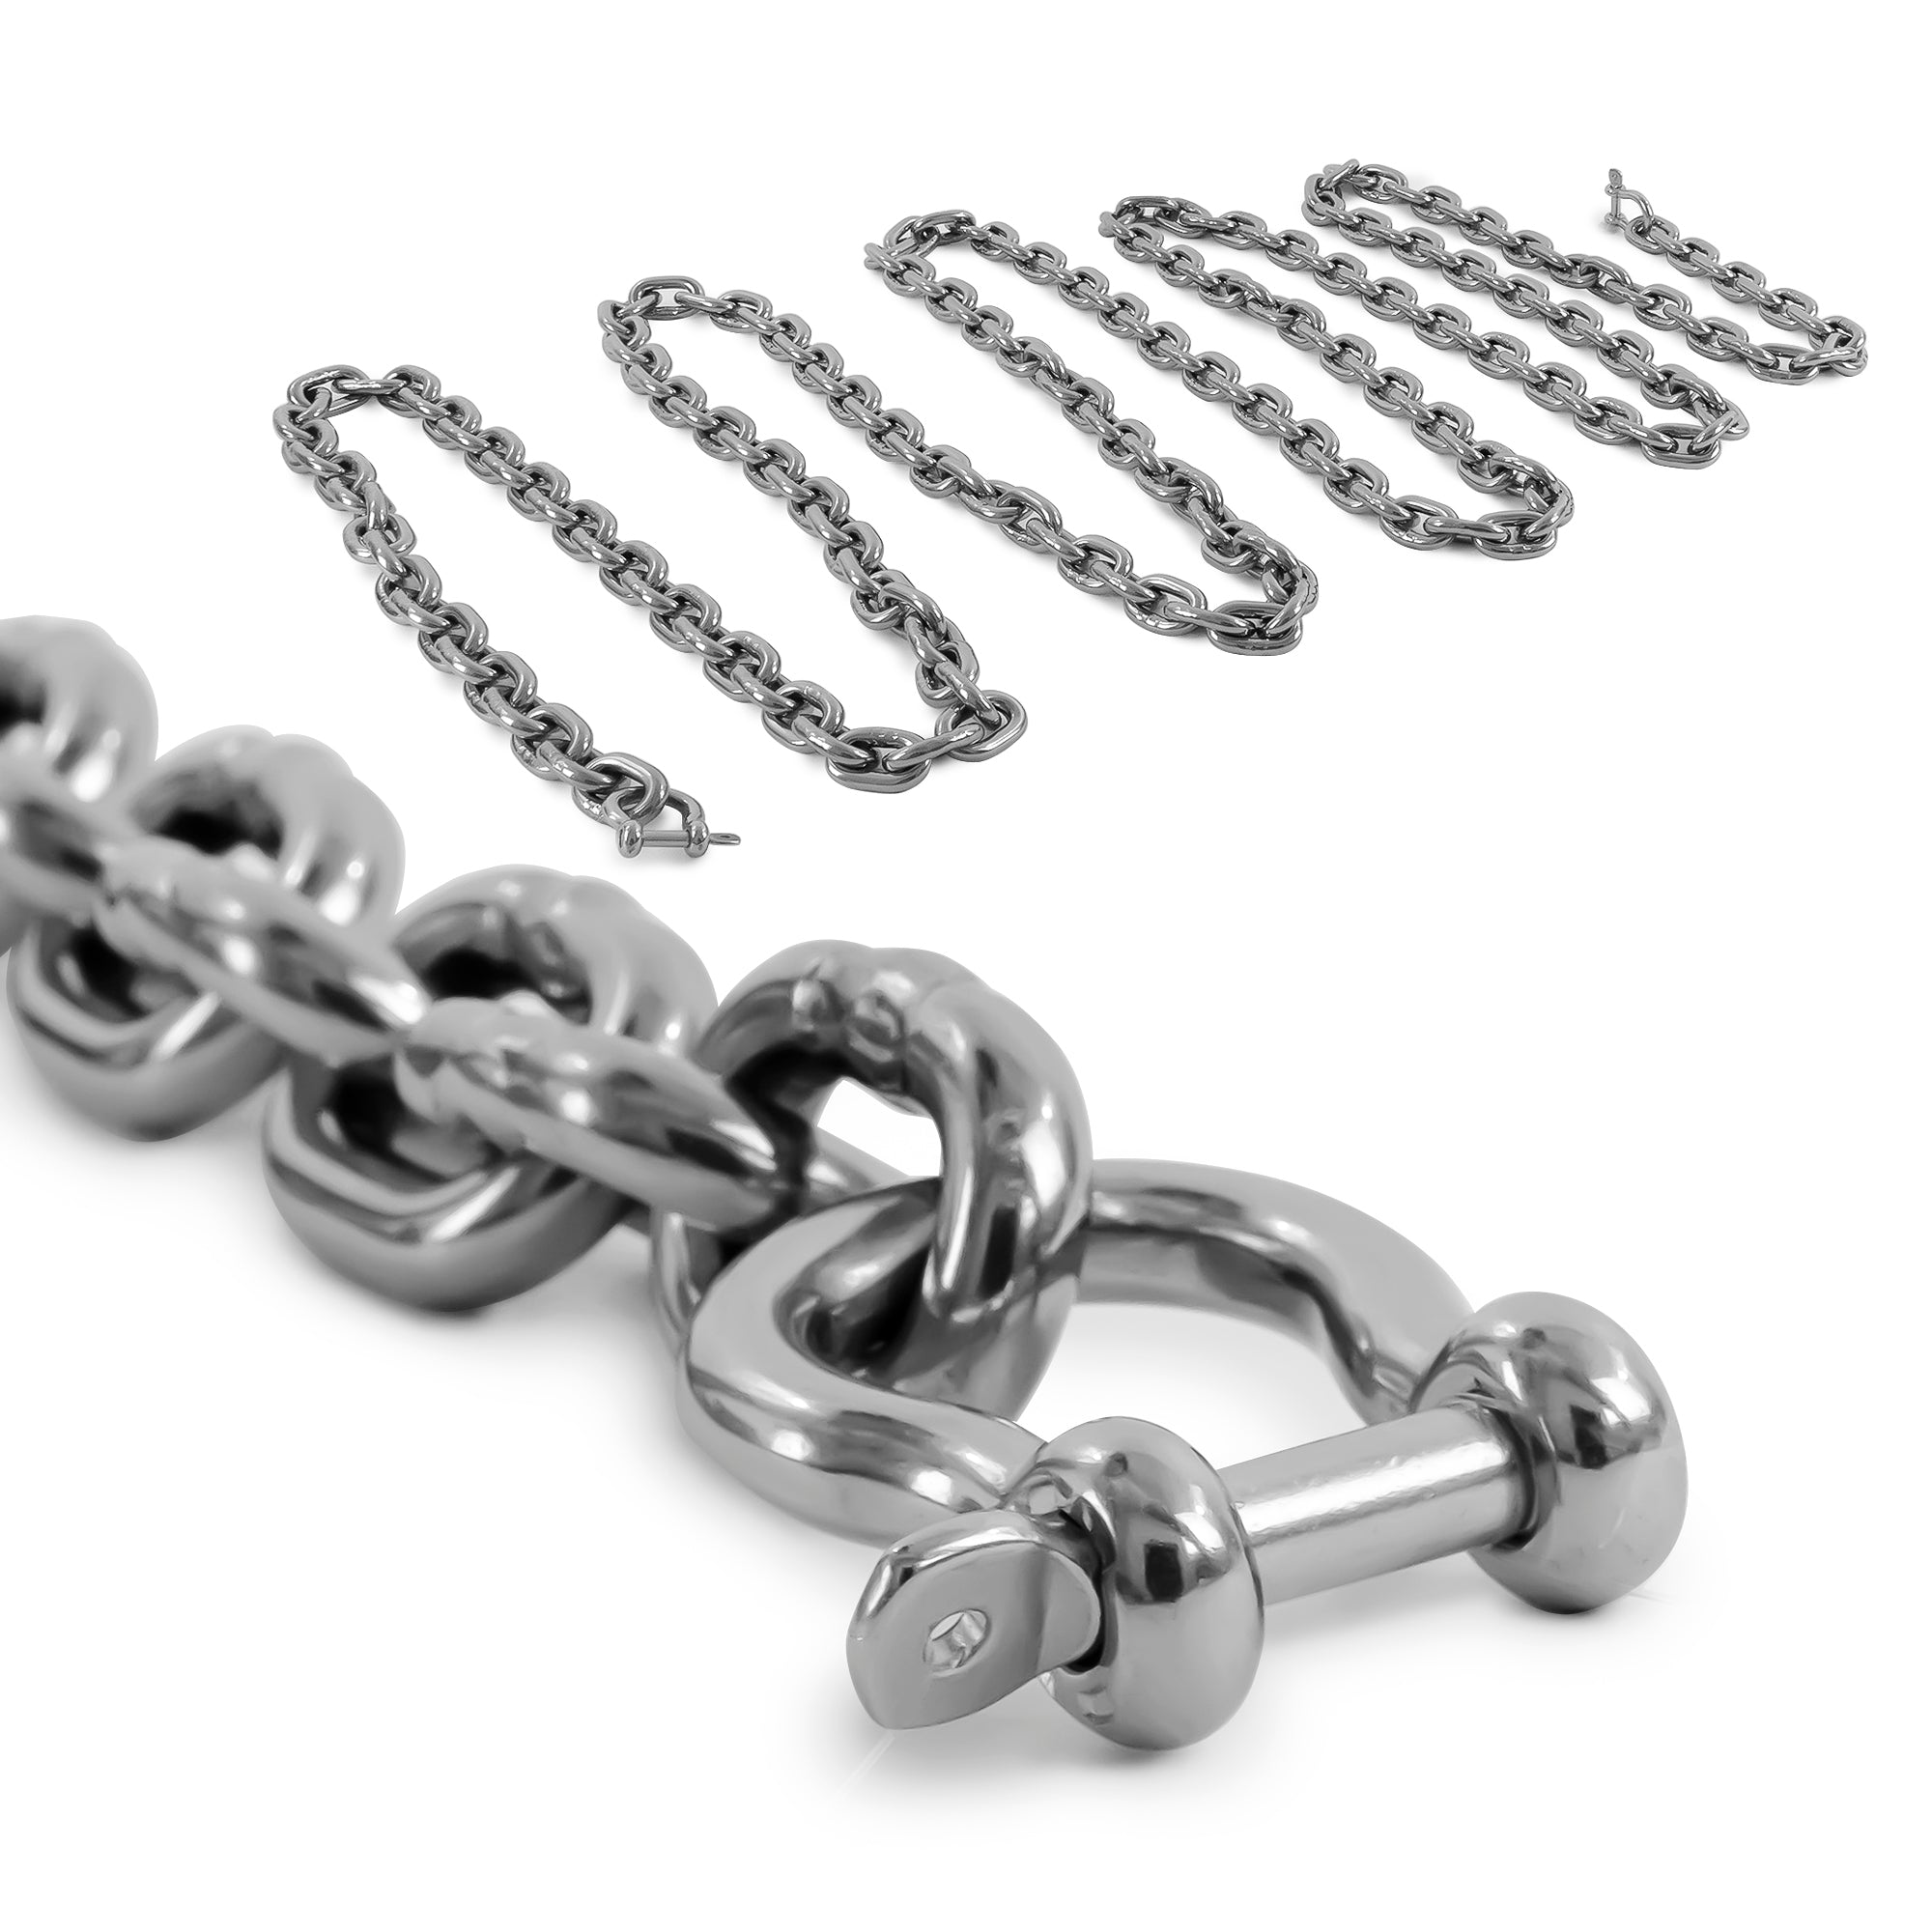 Boat Anchor Lead Chain with Shackles, 1/4" x 15', HTG4 Stainless Steel - FO4492-S15